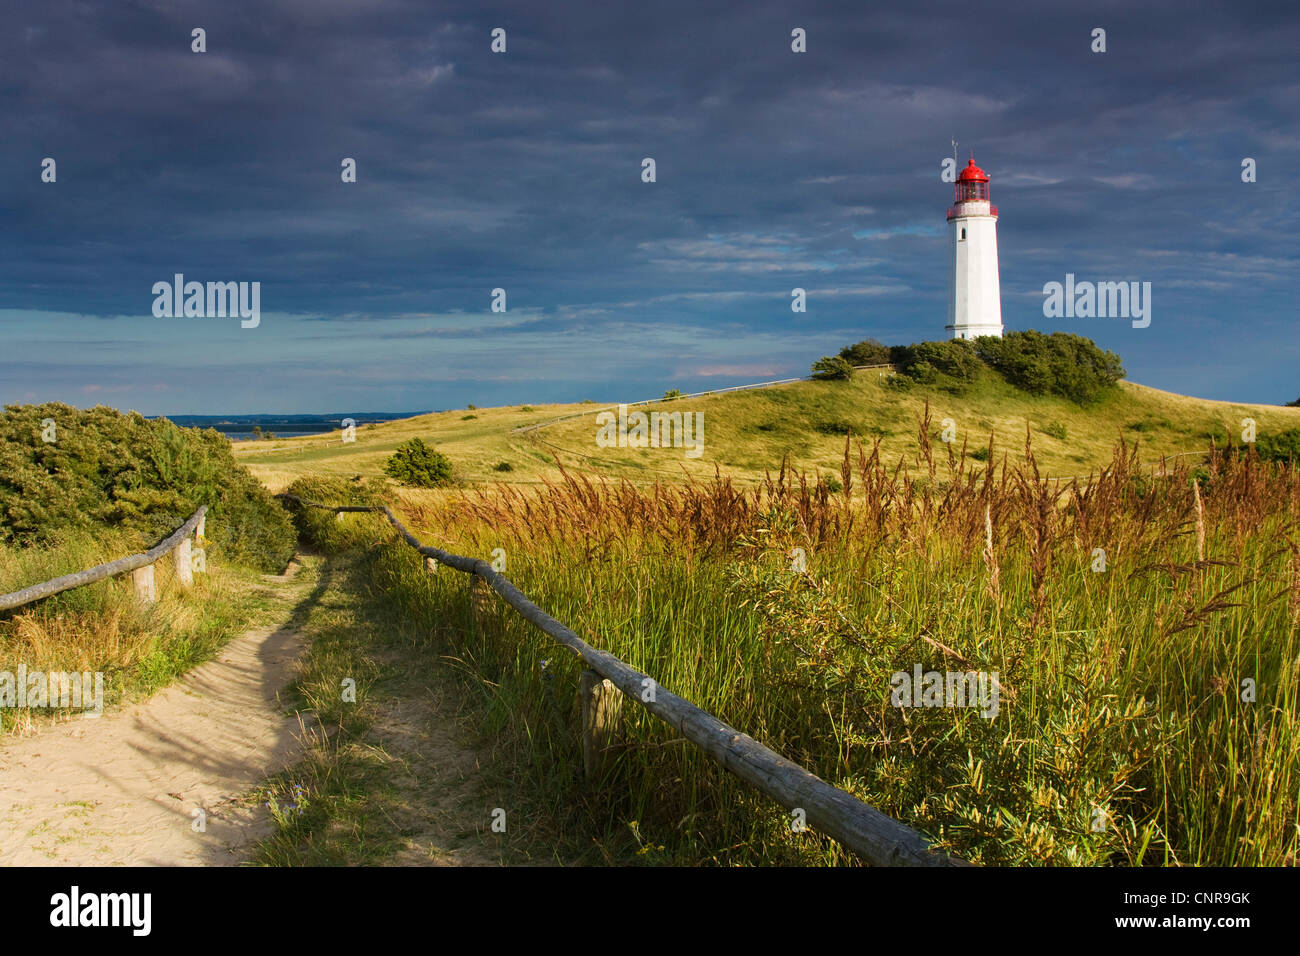 lighthouse at stormy atmosphere, Germany, Mecklenburg-Western Pomerania, Hiddensee Stock Photo